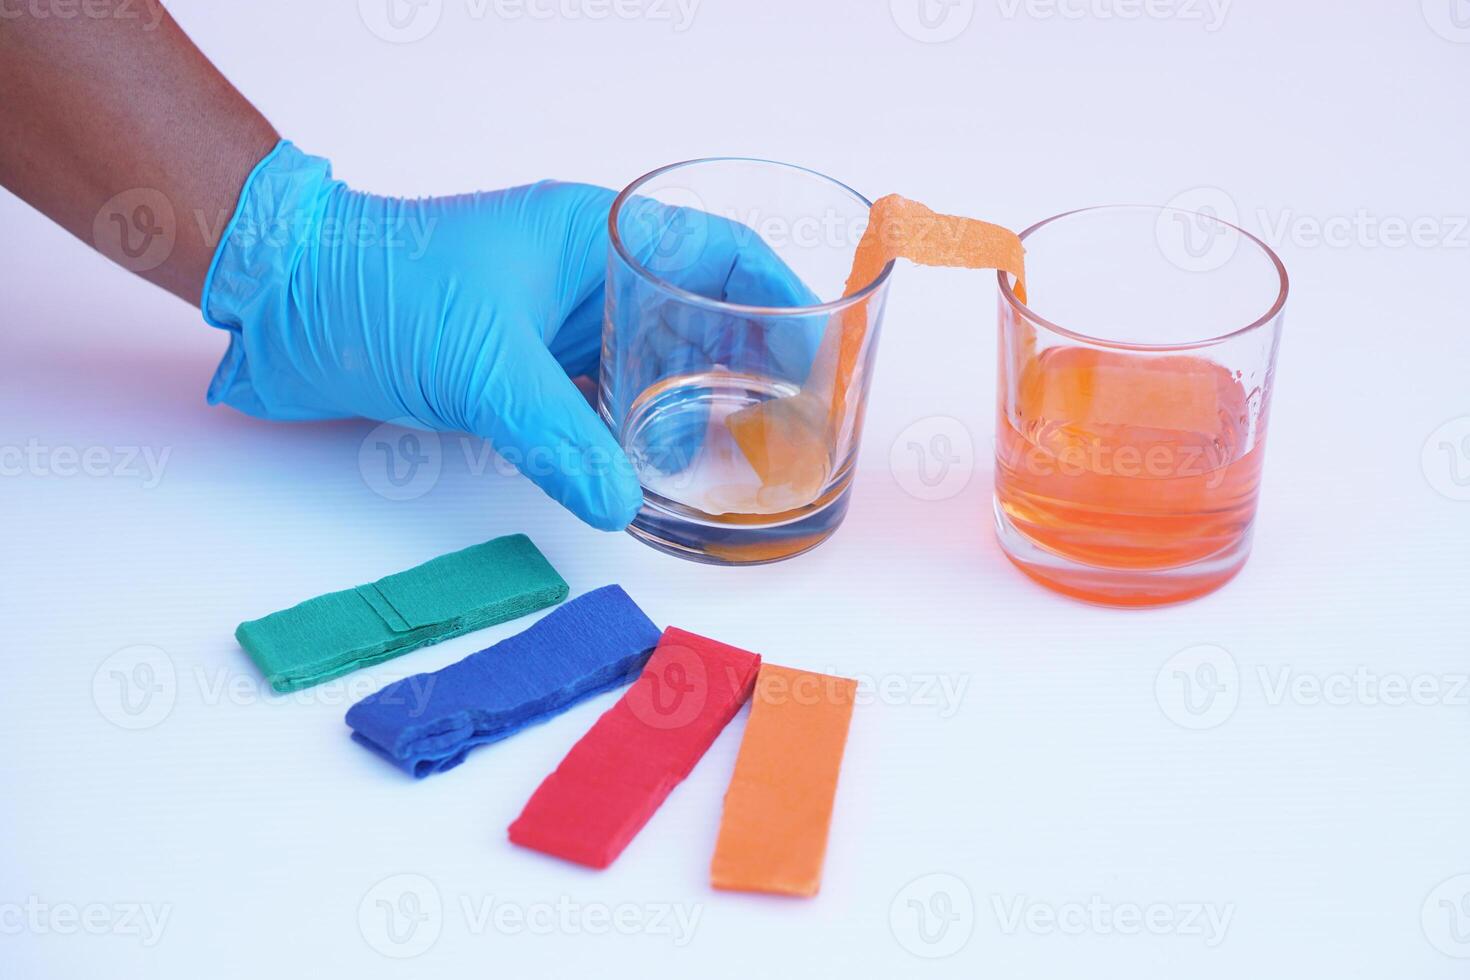 Hand wear blue glove, hold glass of color paper strip to absorb water to another glass. Concept, science lesson activity. Easy experiment for learning. Teaching education materials. Learning design photo